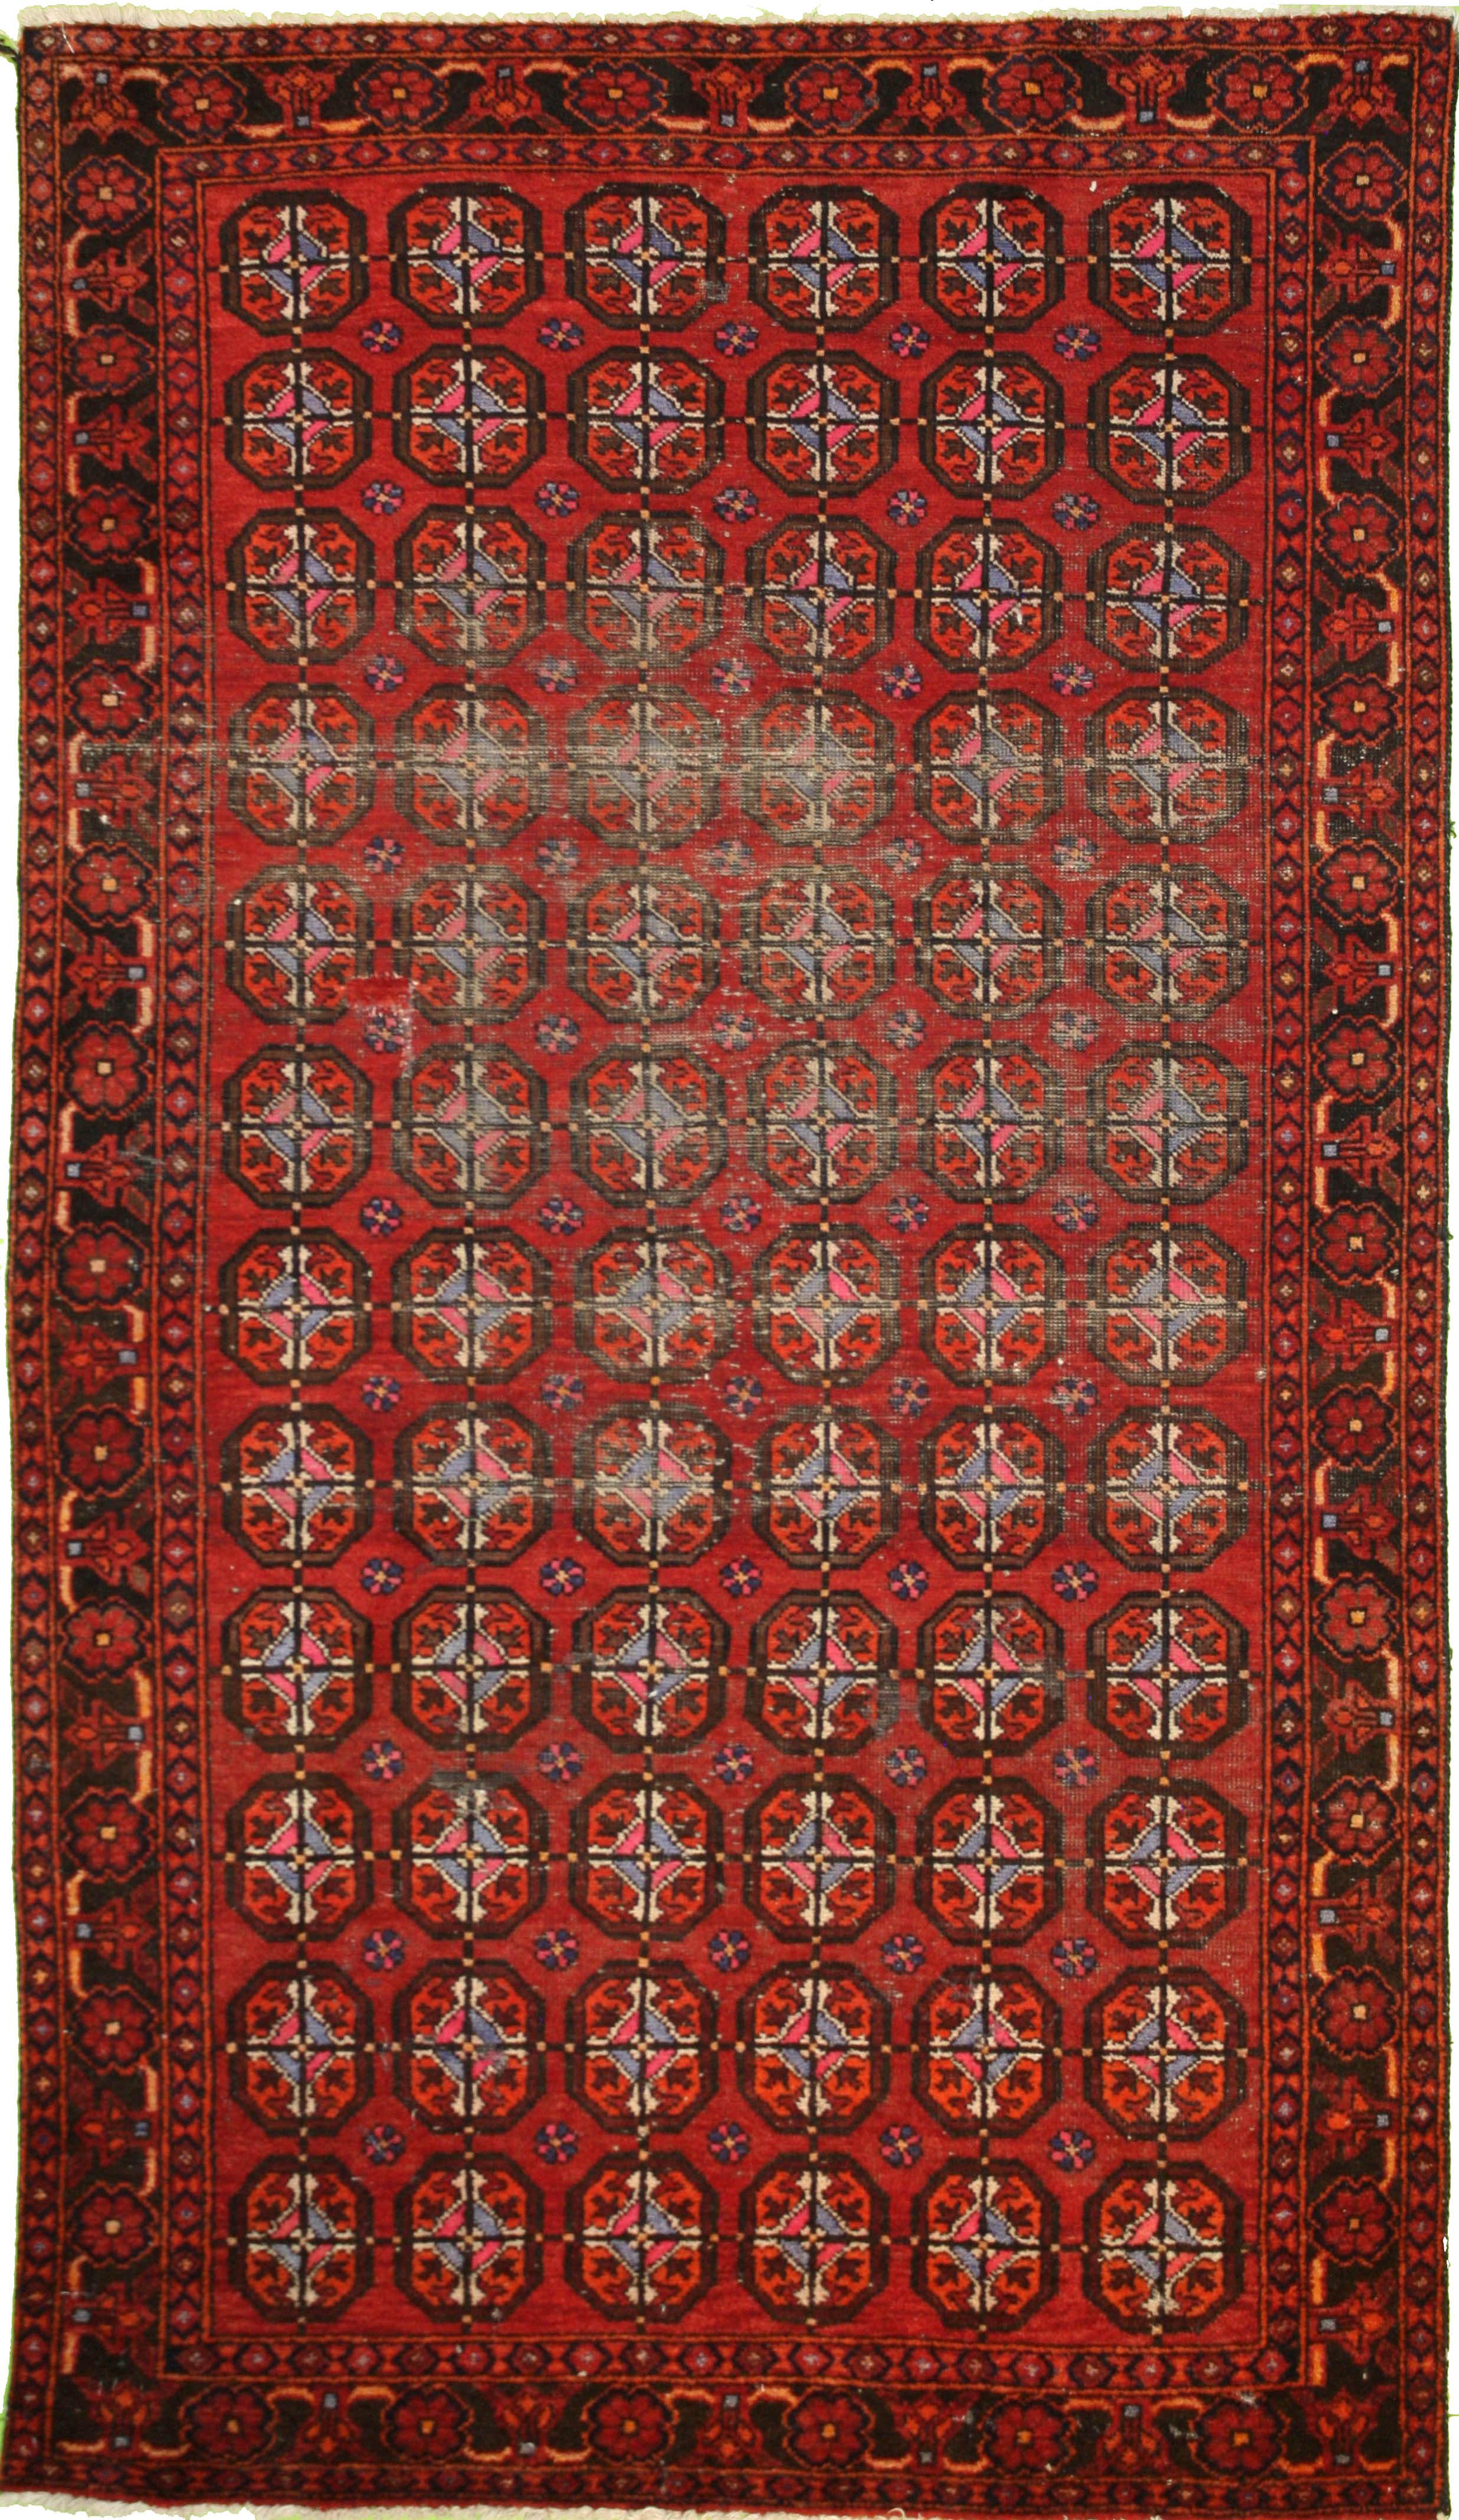 Hand Knotted Wool Red Traditional Afghanistan Rug 3'9" x 6'8"